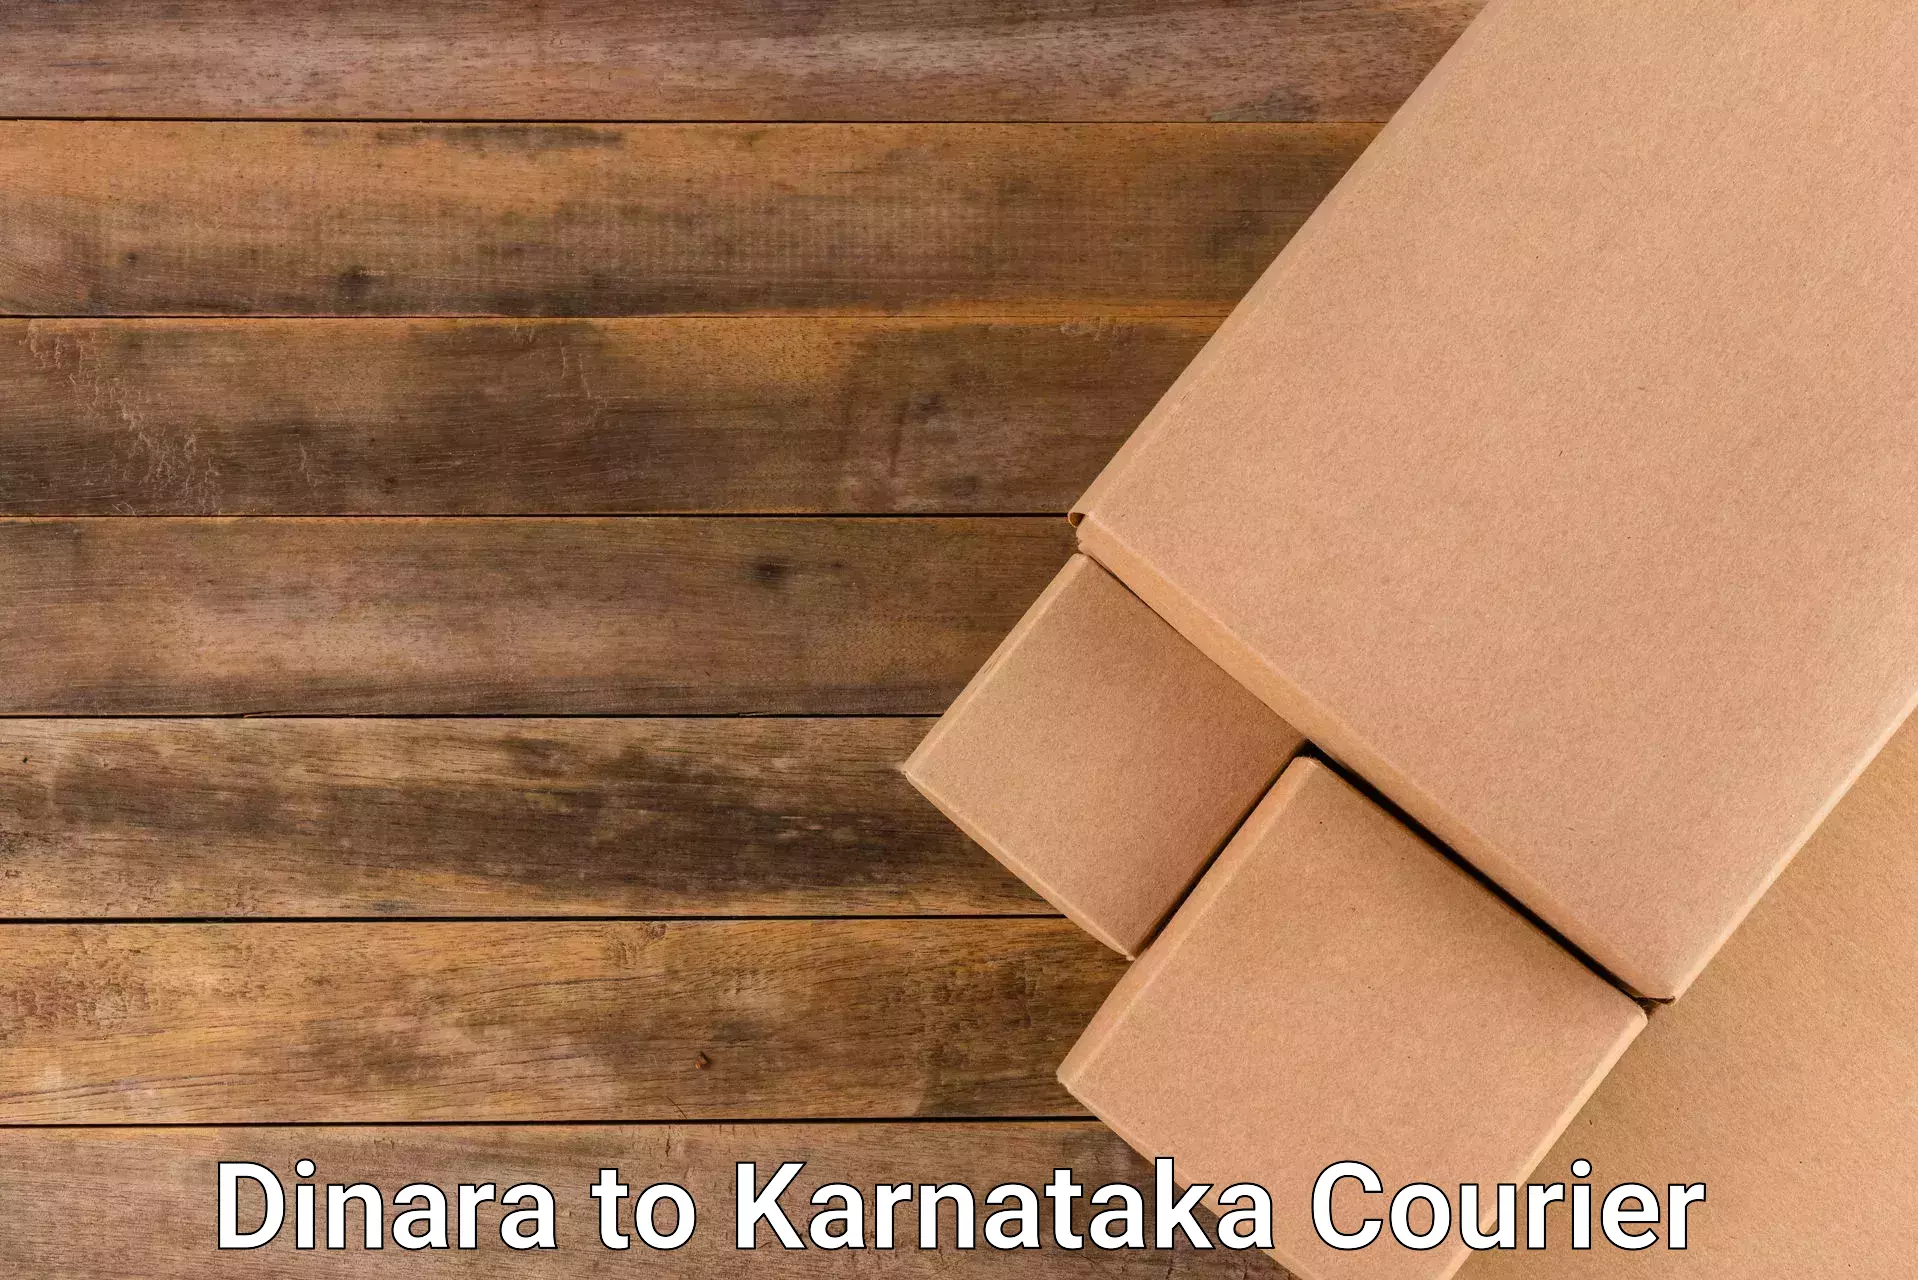 State-of-the-art courier technology Dinara to Bangalore